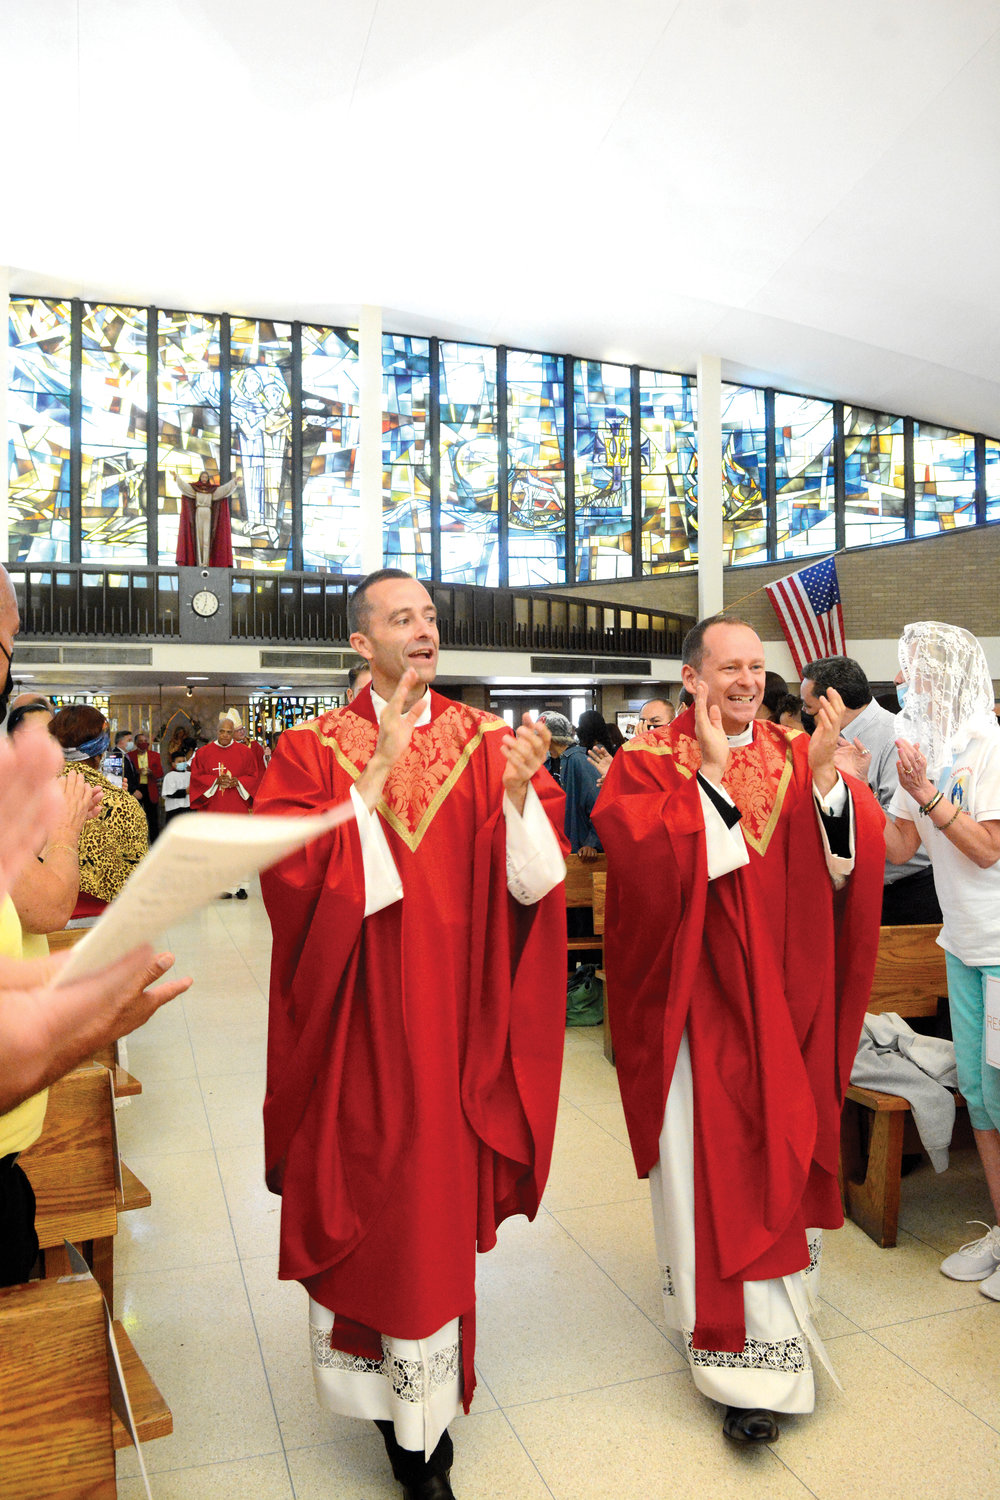 Father Vincent Druding, parochial vicar, left, and Father John Higgins, pastor, show their joy during the opening procession of the 100th anniversary Mass at Holy Cross Church in the Bronx Sept. 19.